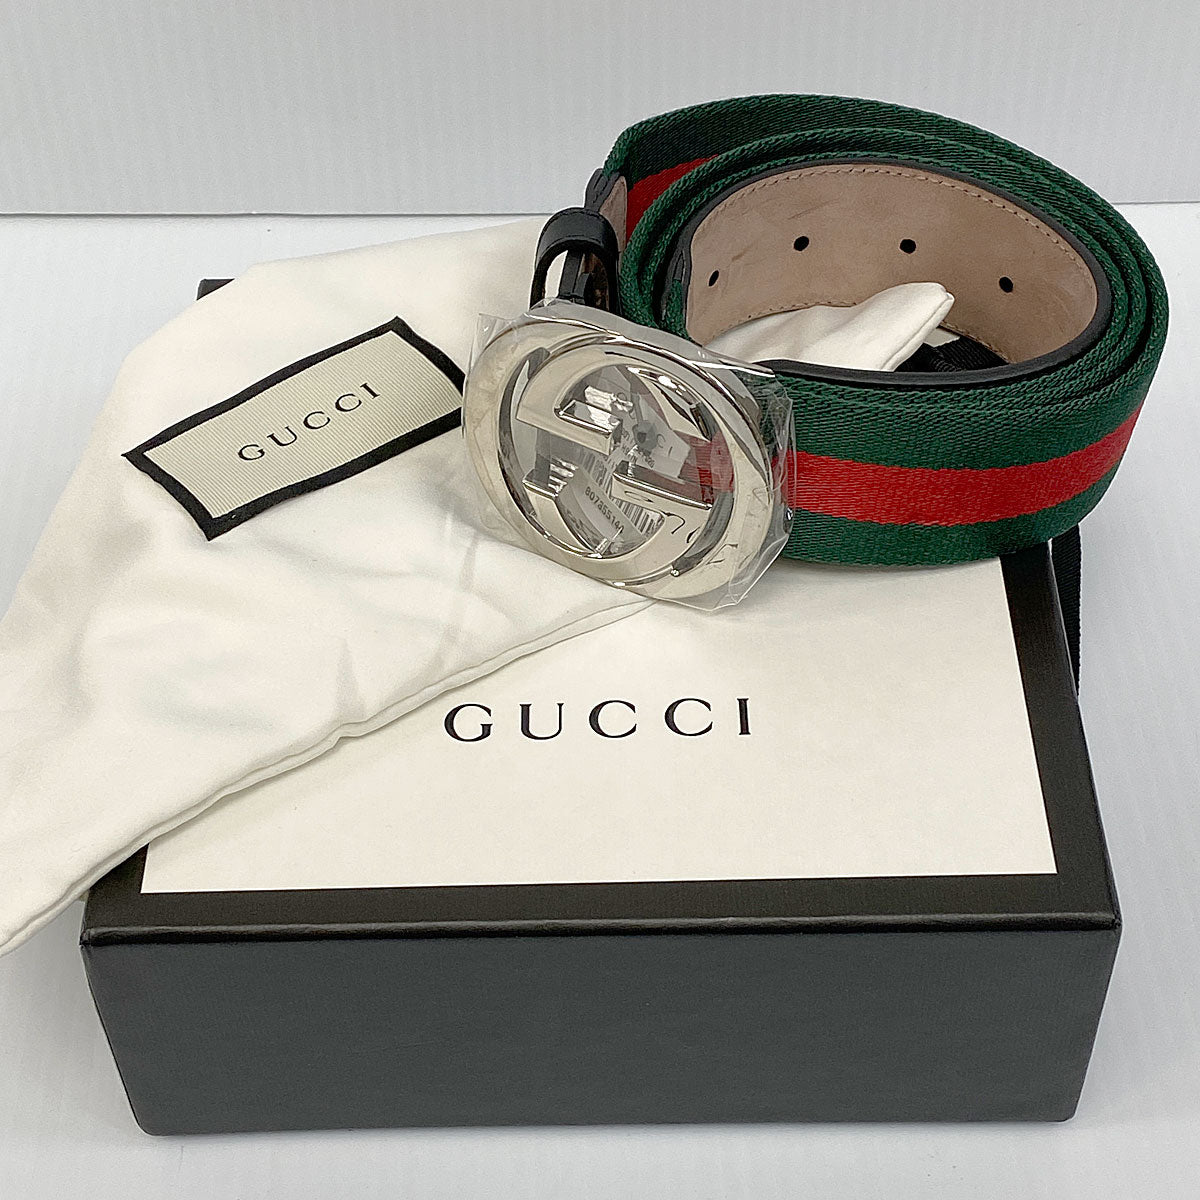 Gucci Green & Red Web Belt with G Buckle